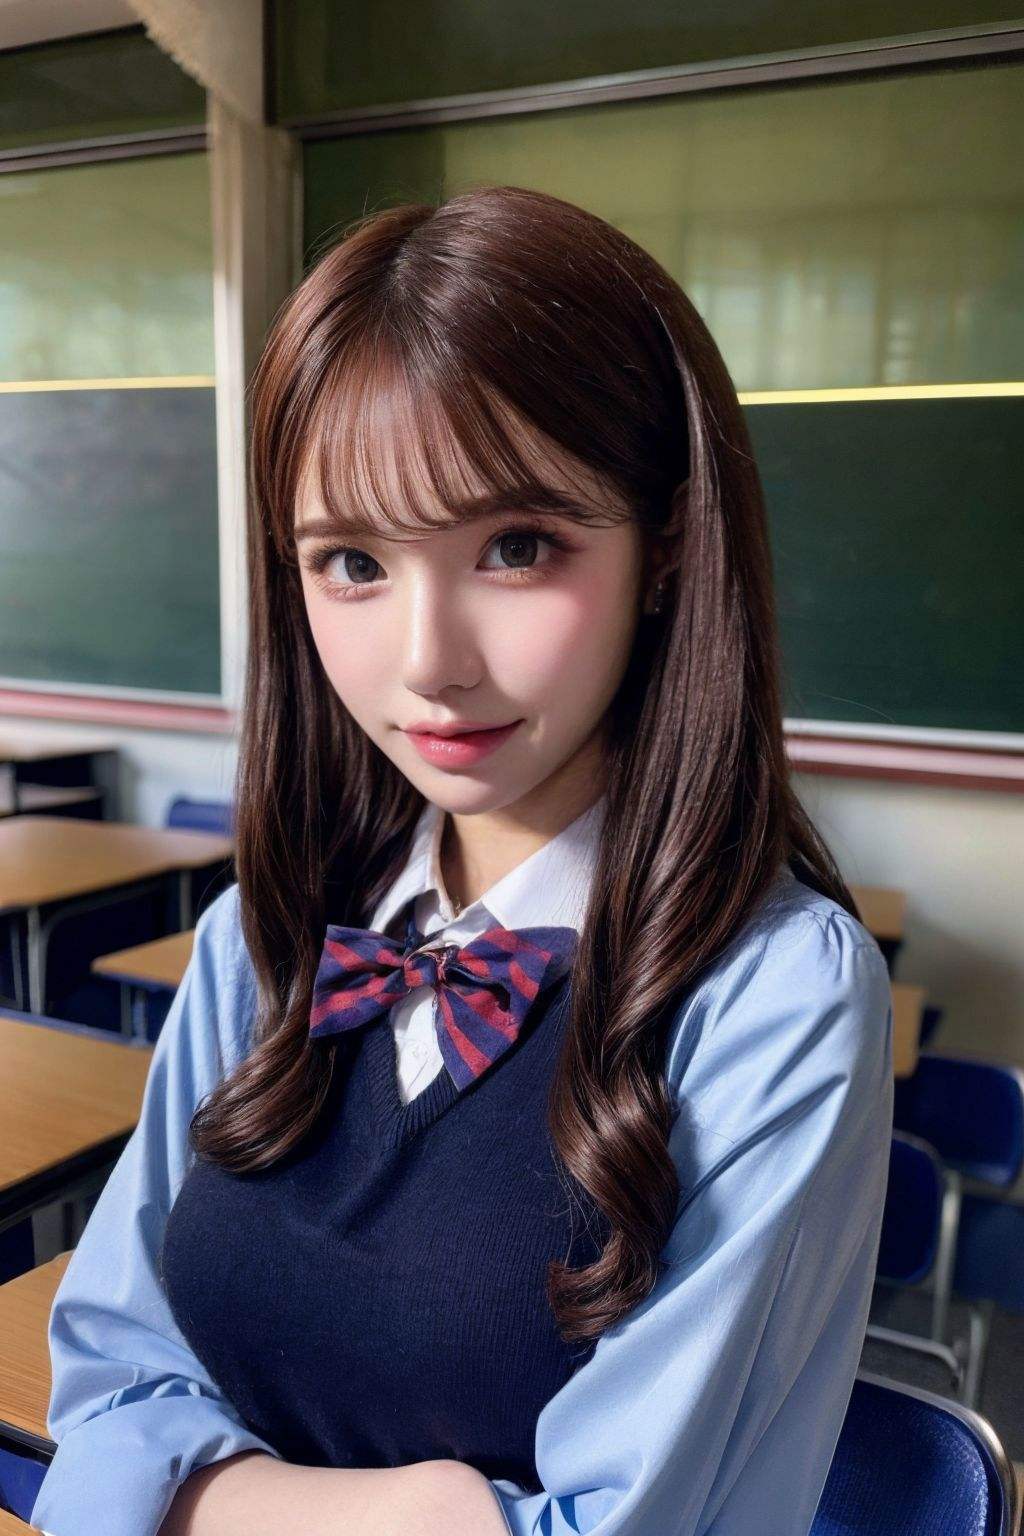 <lora:add_detail:0.8> <lora:LowRa:0.6>,a photo of nyairin_18, 18 year old girl in the classroom, close up, <lora:nyairin_18-12:0.9>, (intricate details:0.8), (hdr, hyperdetailed:1.2), school uniform